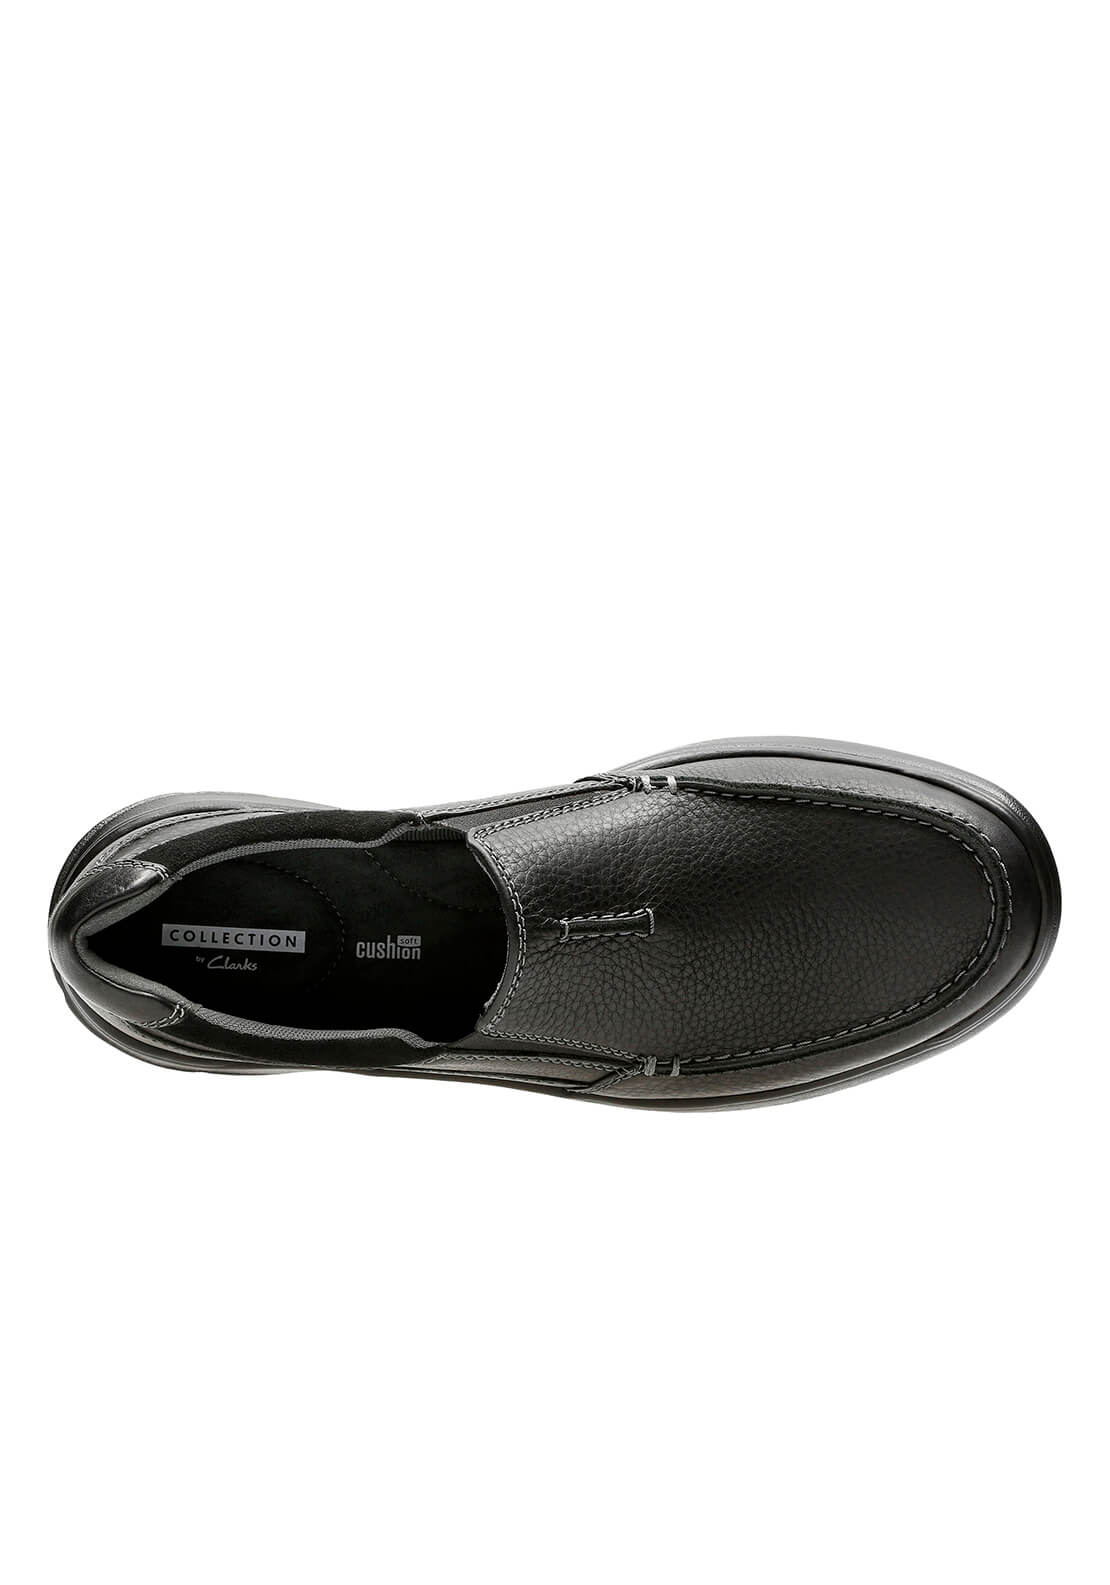 Clarks Cotrell Free Casual Shoe - Black 4 Shaws Department Stores